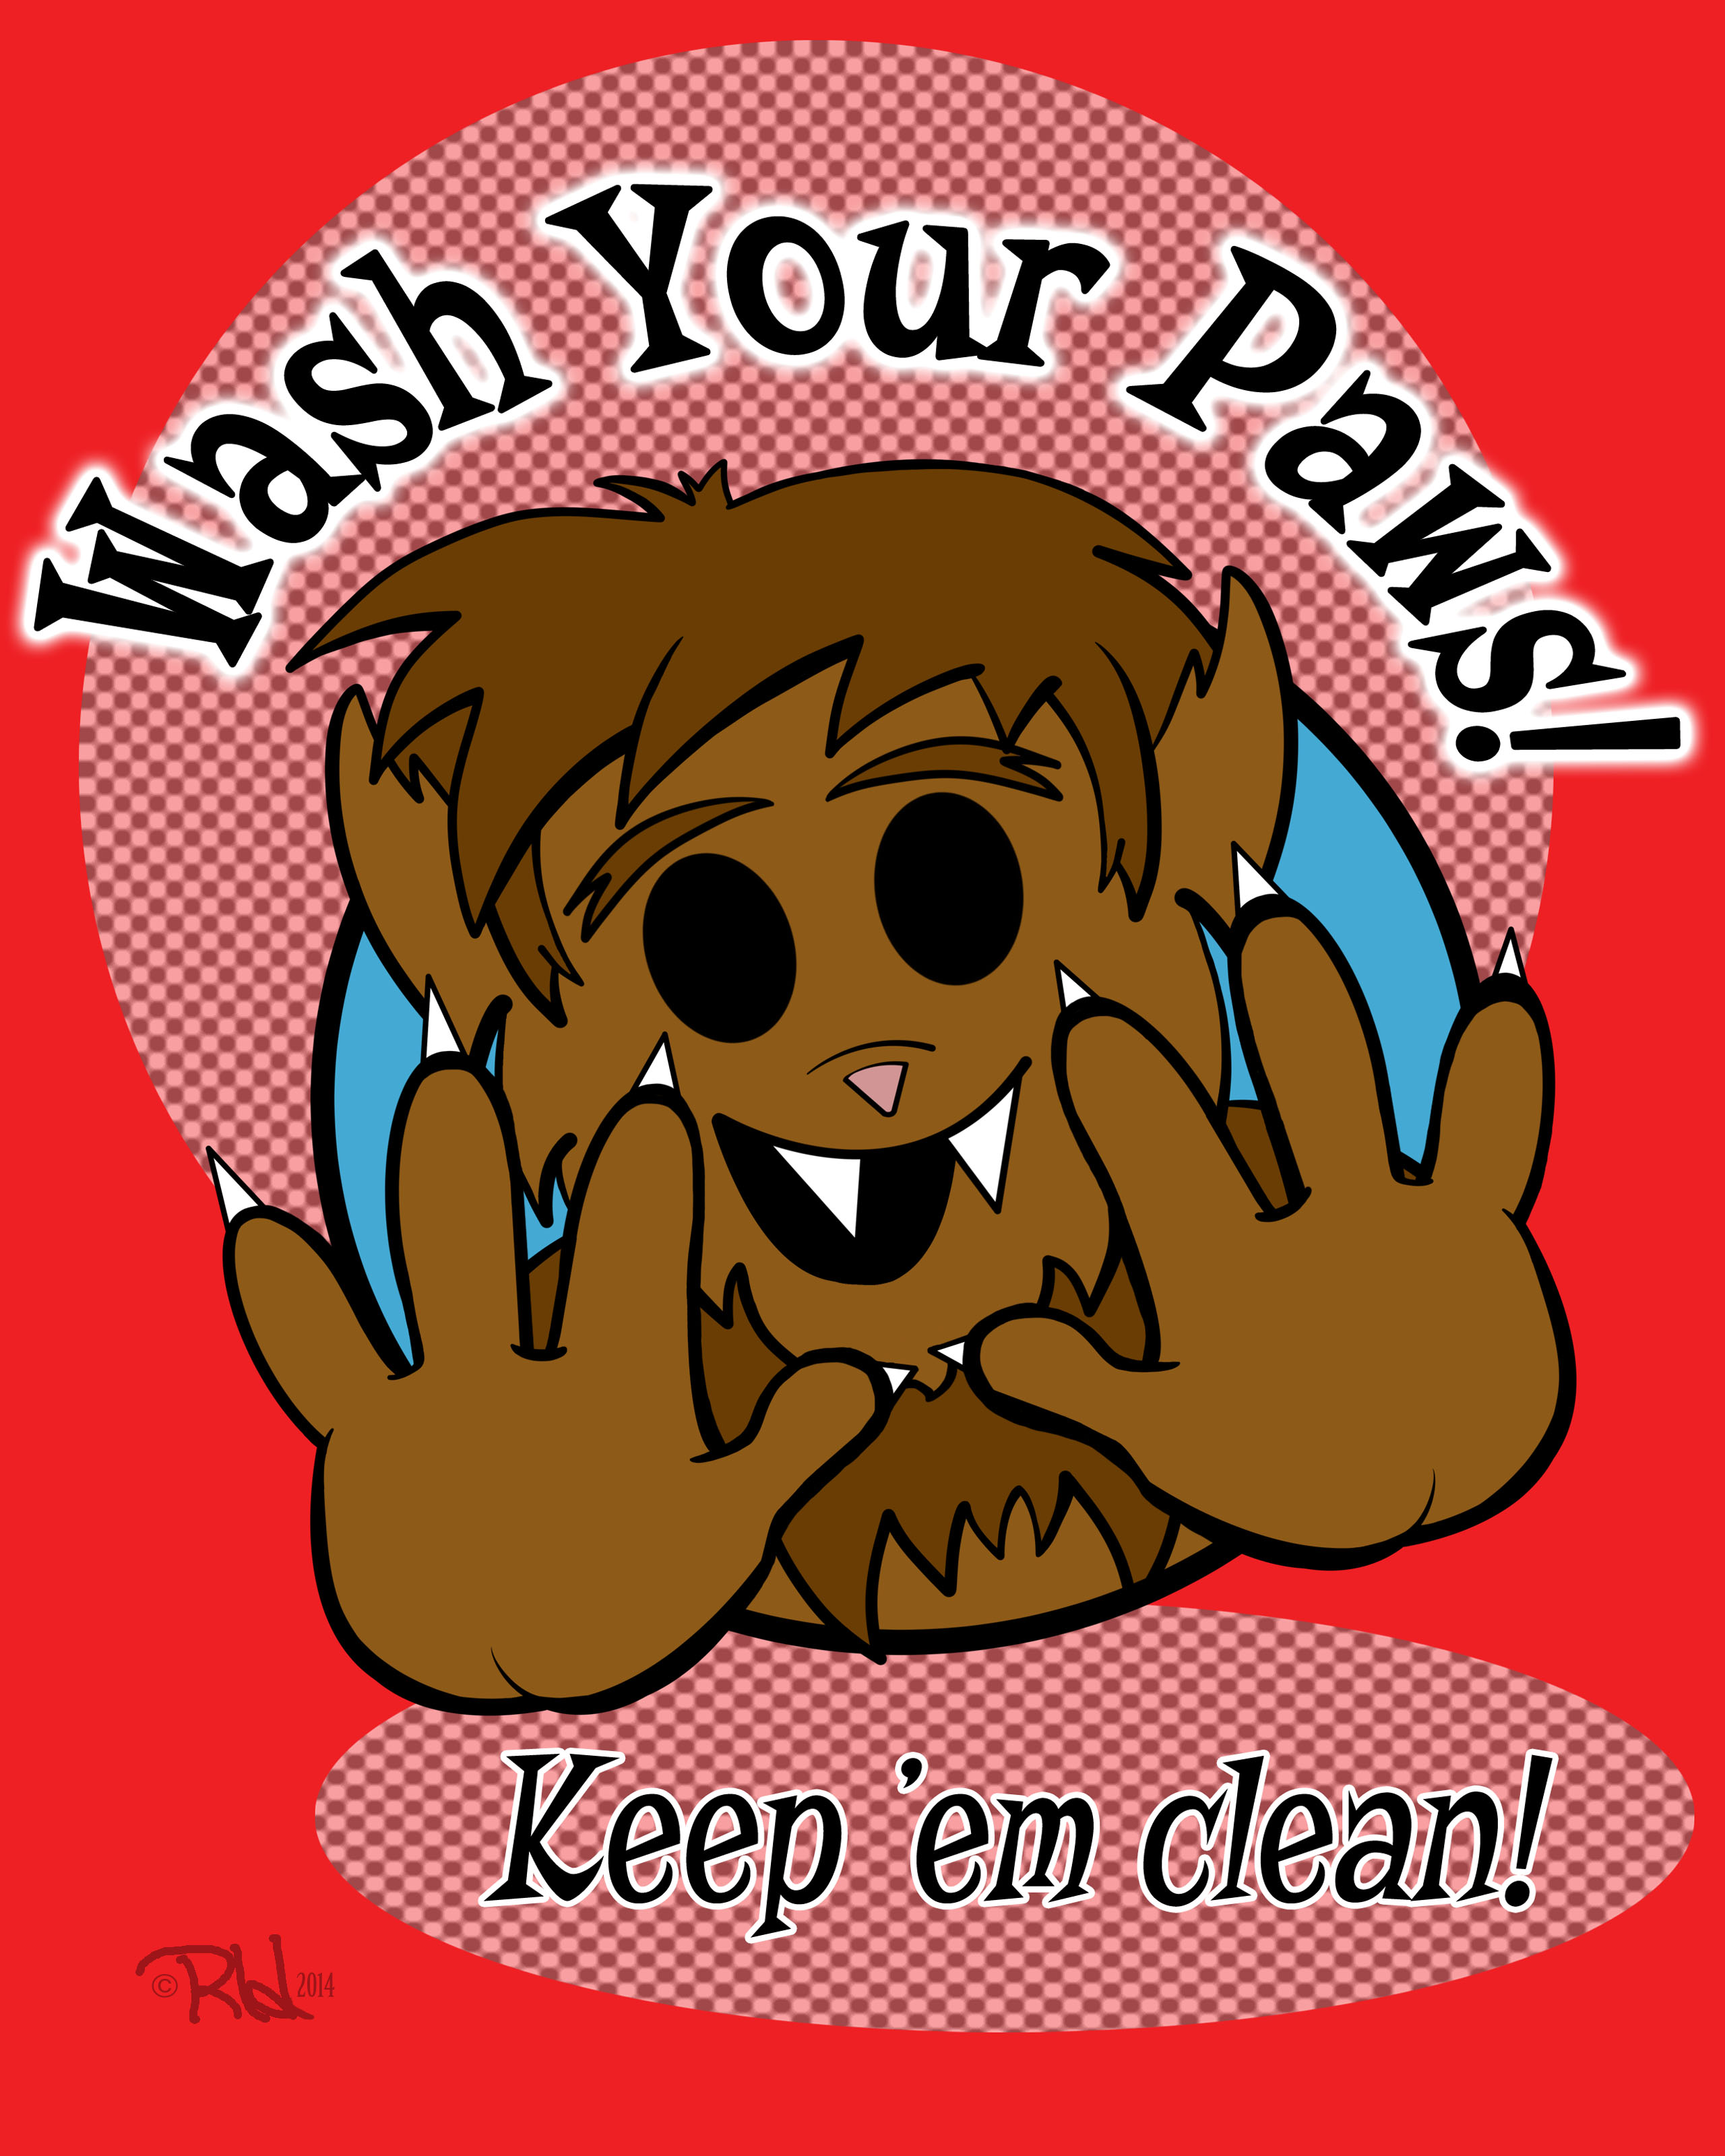 Wolfie proudly displays his clean paws. The caption reads “Wash your paws! Keep ‘em clean!